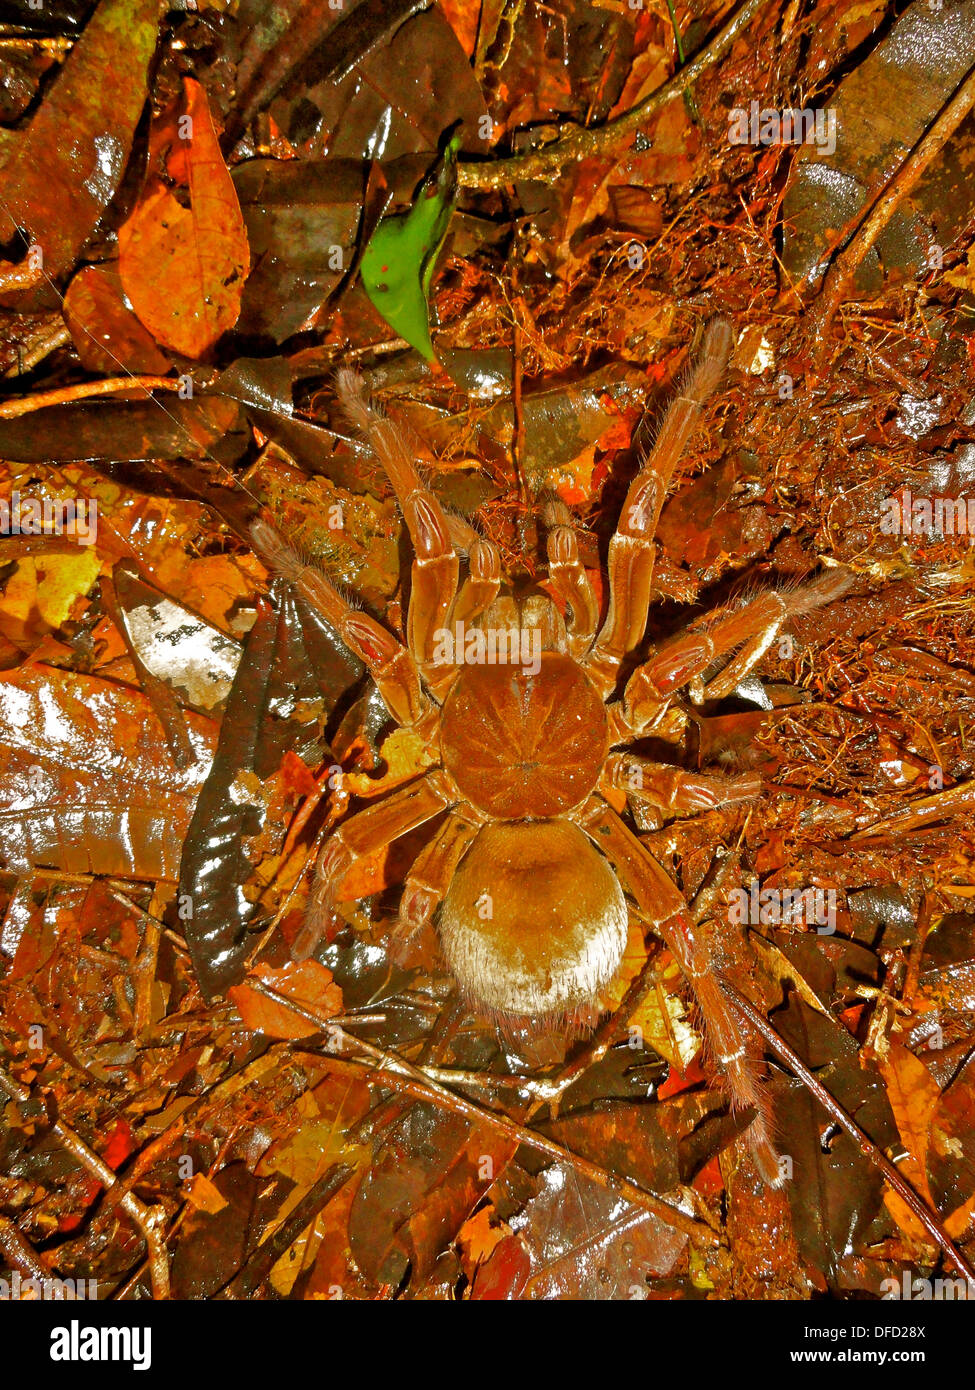 A Goliath bird eating spider, the largest of the Tarantula family, in the Amazon rainforest, near Manaus, Brazil Stock Photo